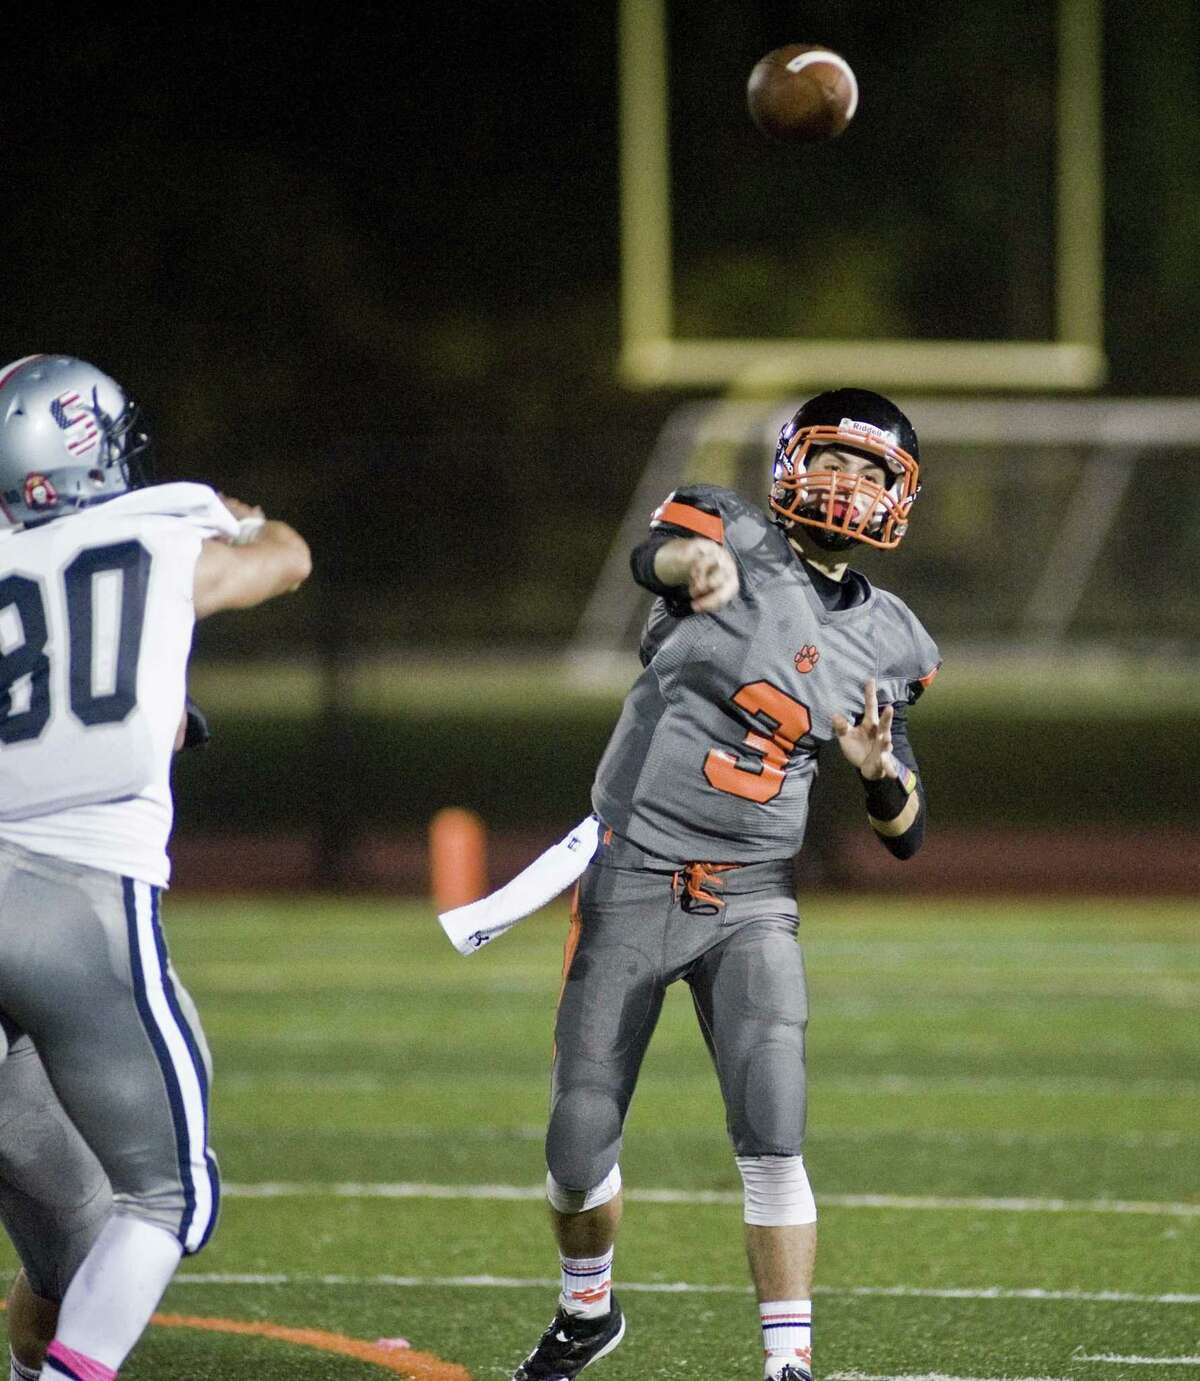 Ridgefield High School quarterback Gregory Gatto fires a pass in a game against Staples High School, played at Ridgefield. Friday, Oct. 21, 2016